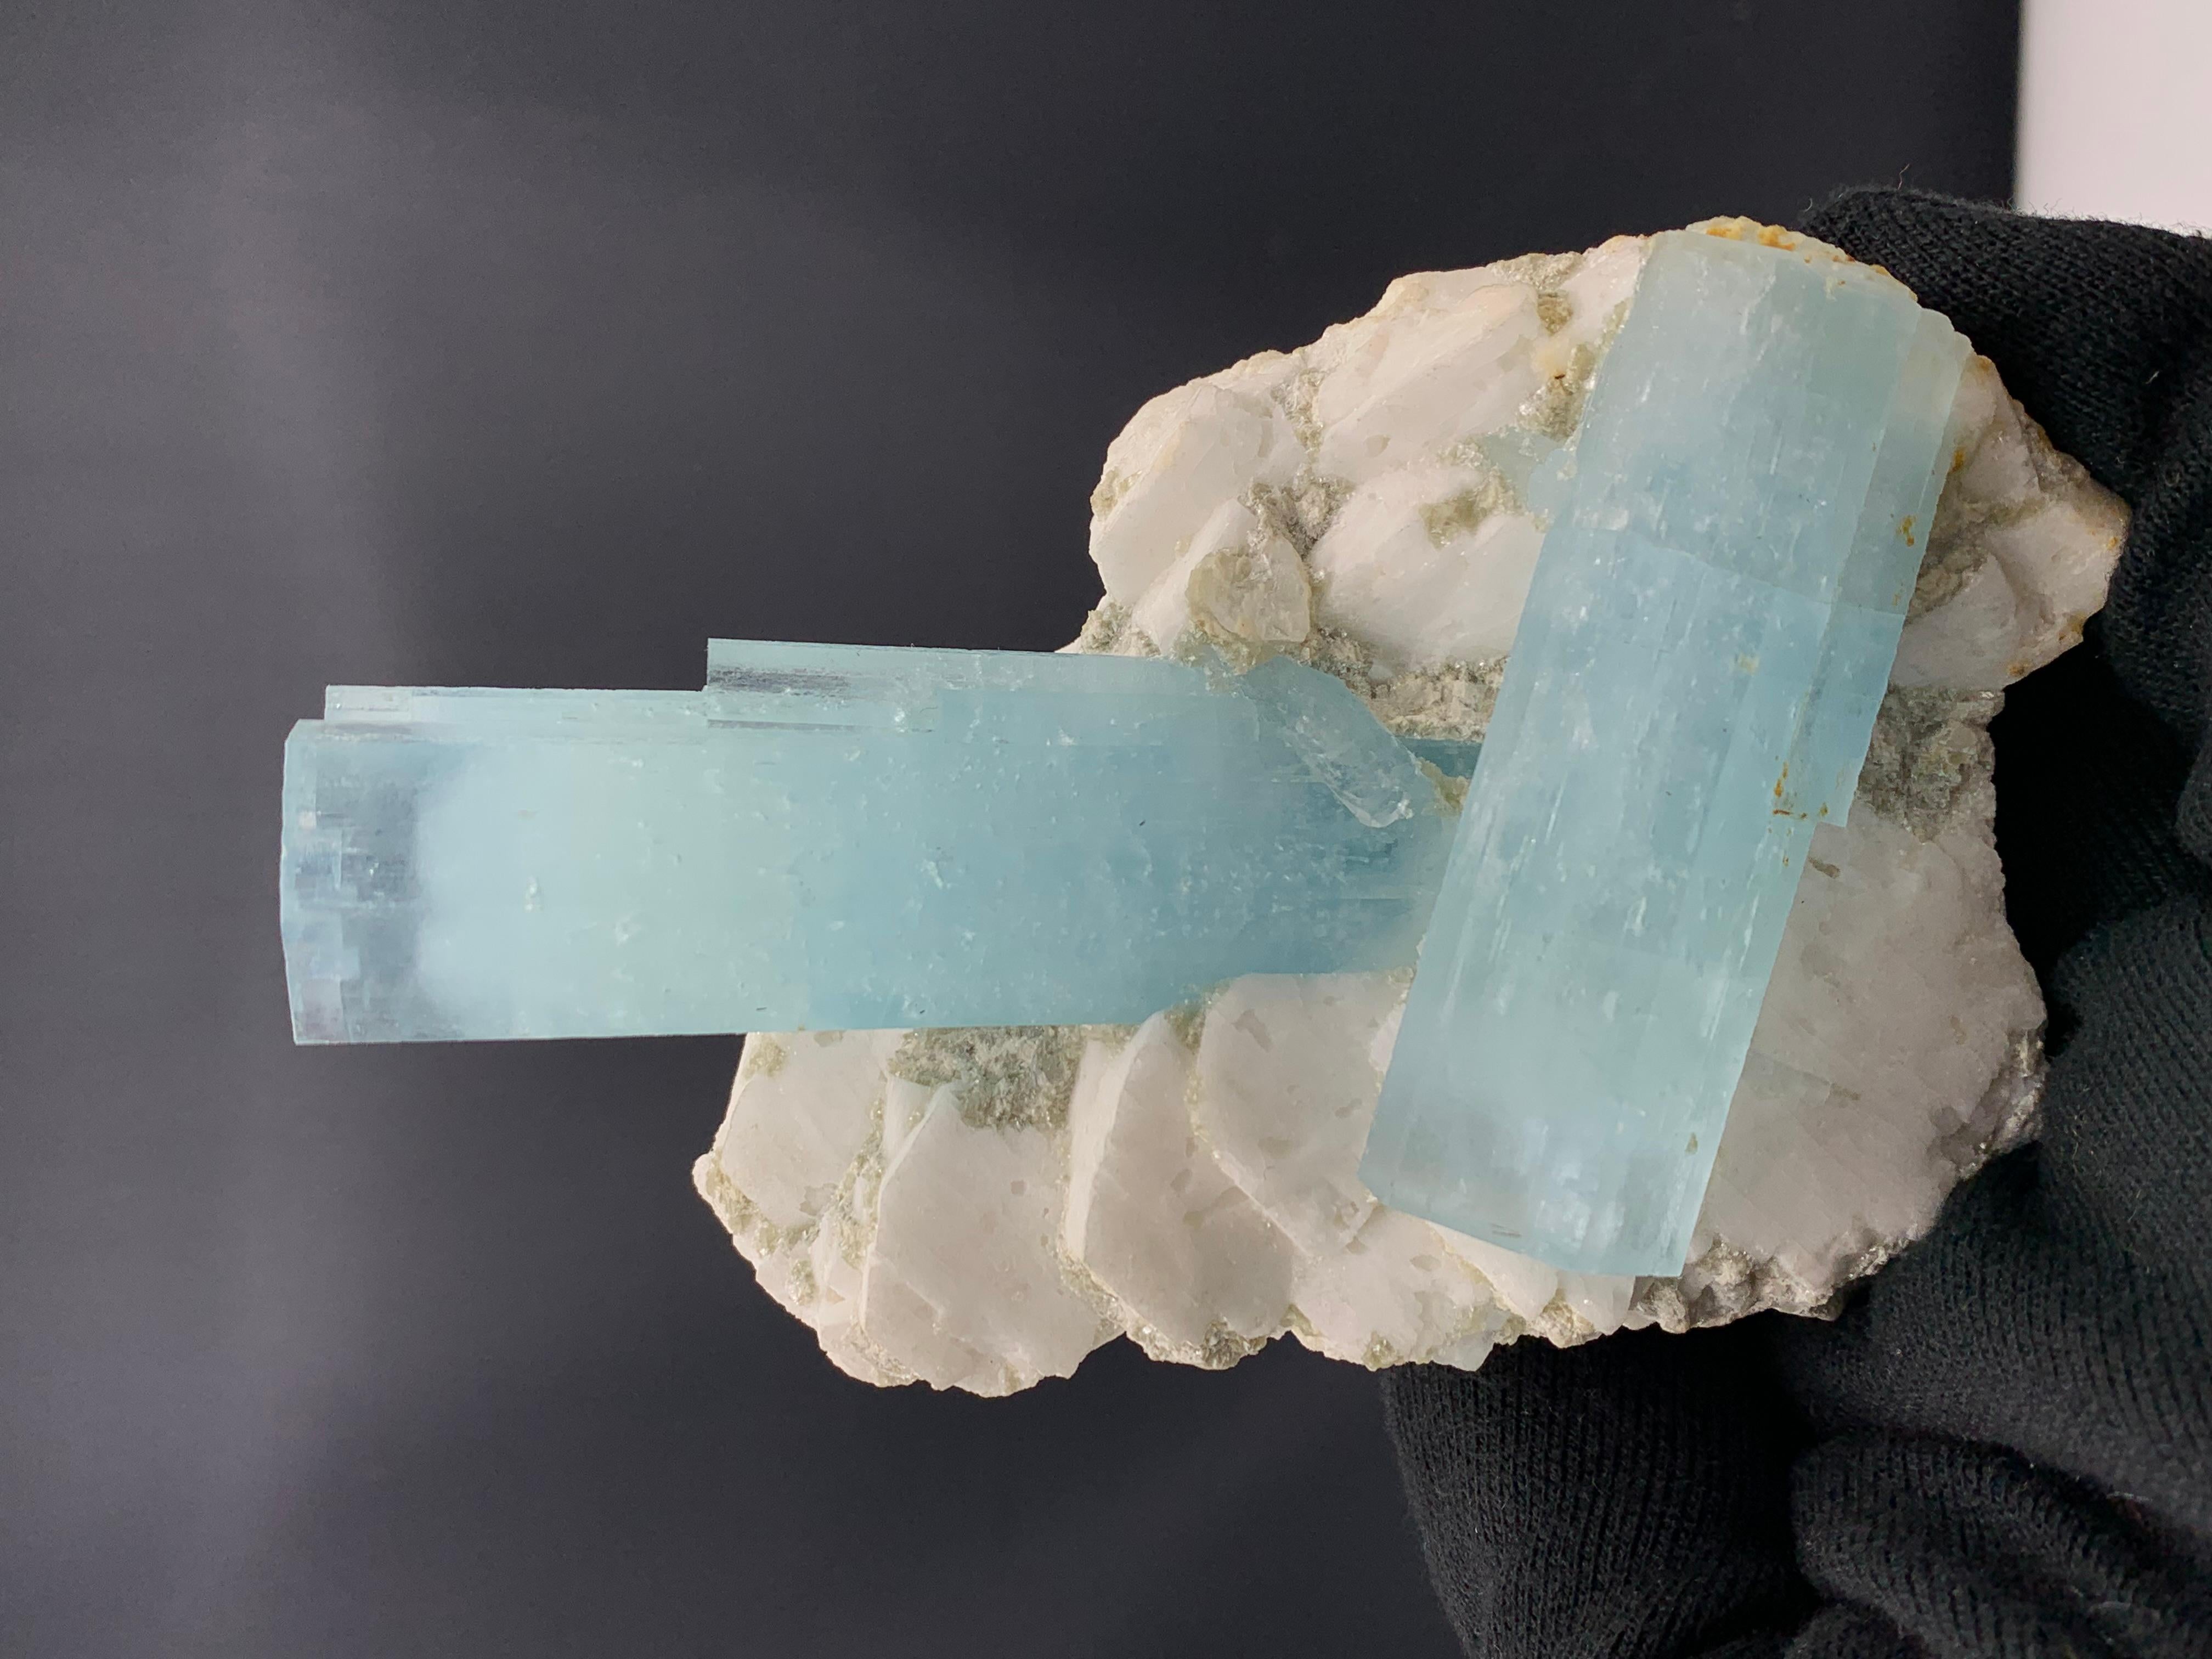 Other 428.97 Gram Amazing Dual Aquamarine Crystal Attach With Feldspar From Pakistan  For Sale